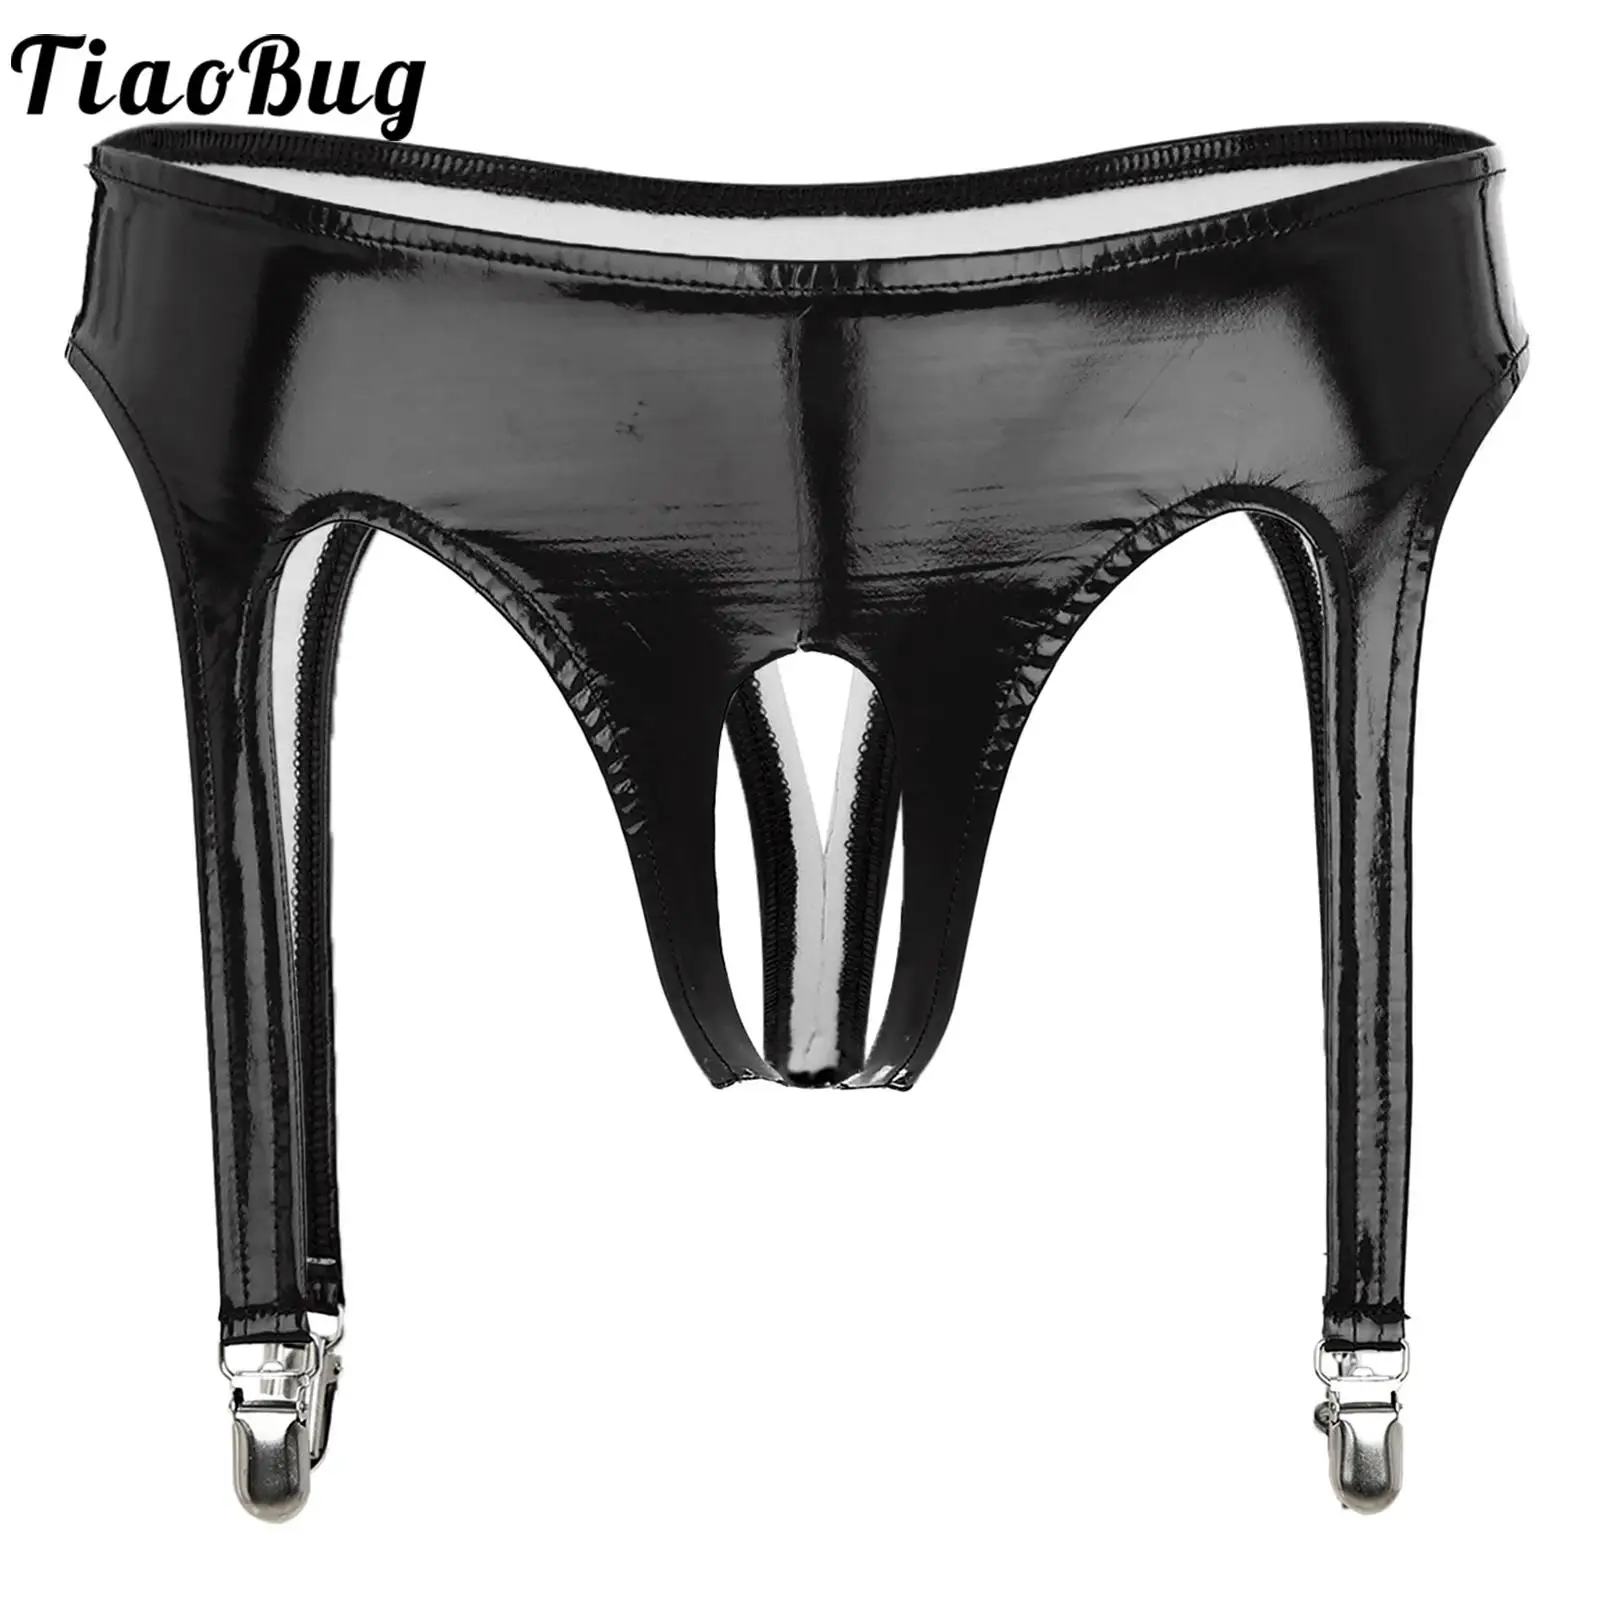 

Womens Glossy Wetlook Patent Leather Briefs Underwear with Garter Clips Low Rise Crotchless Thongs Lingerie Clubwear Sleepwear